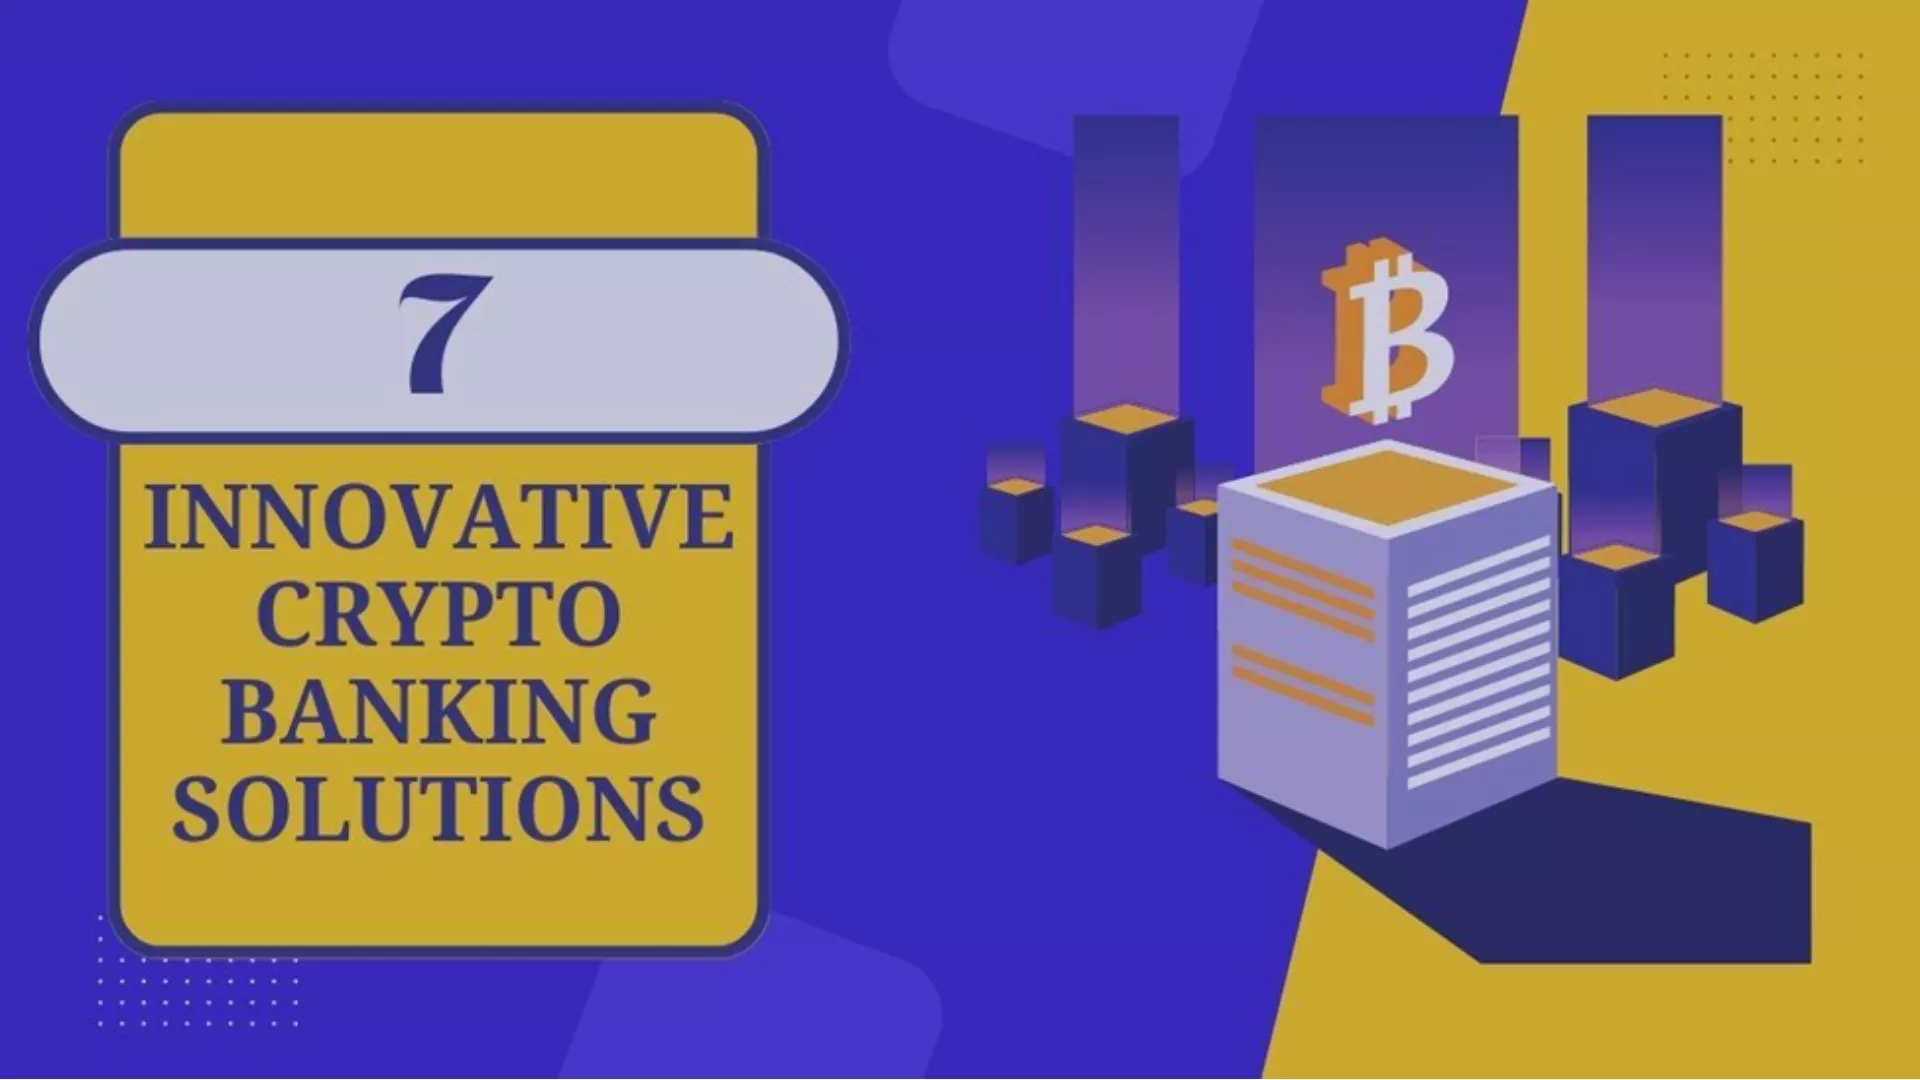 7 Innovative Crypto Banking Solutions